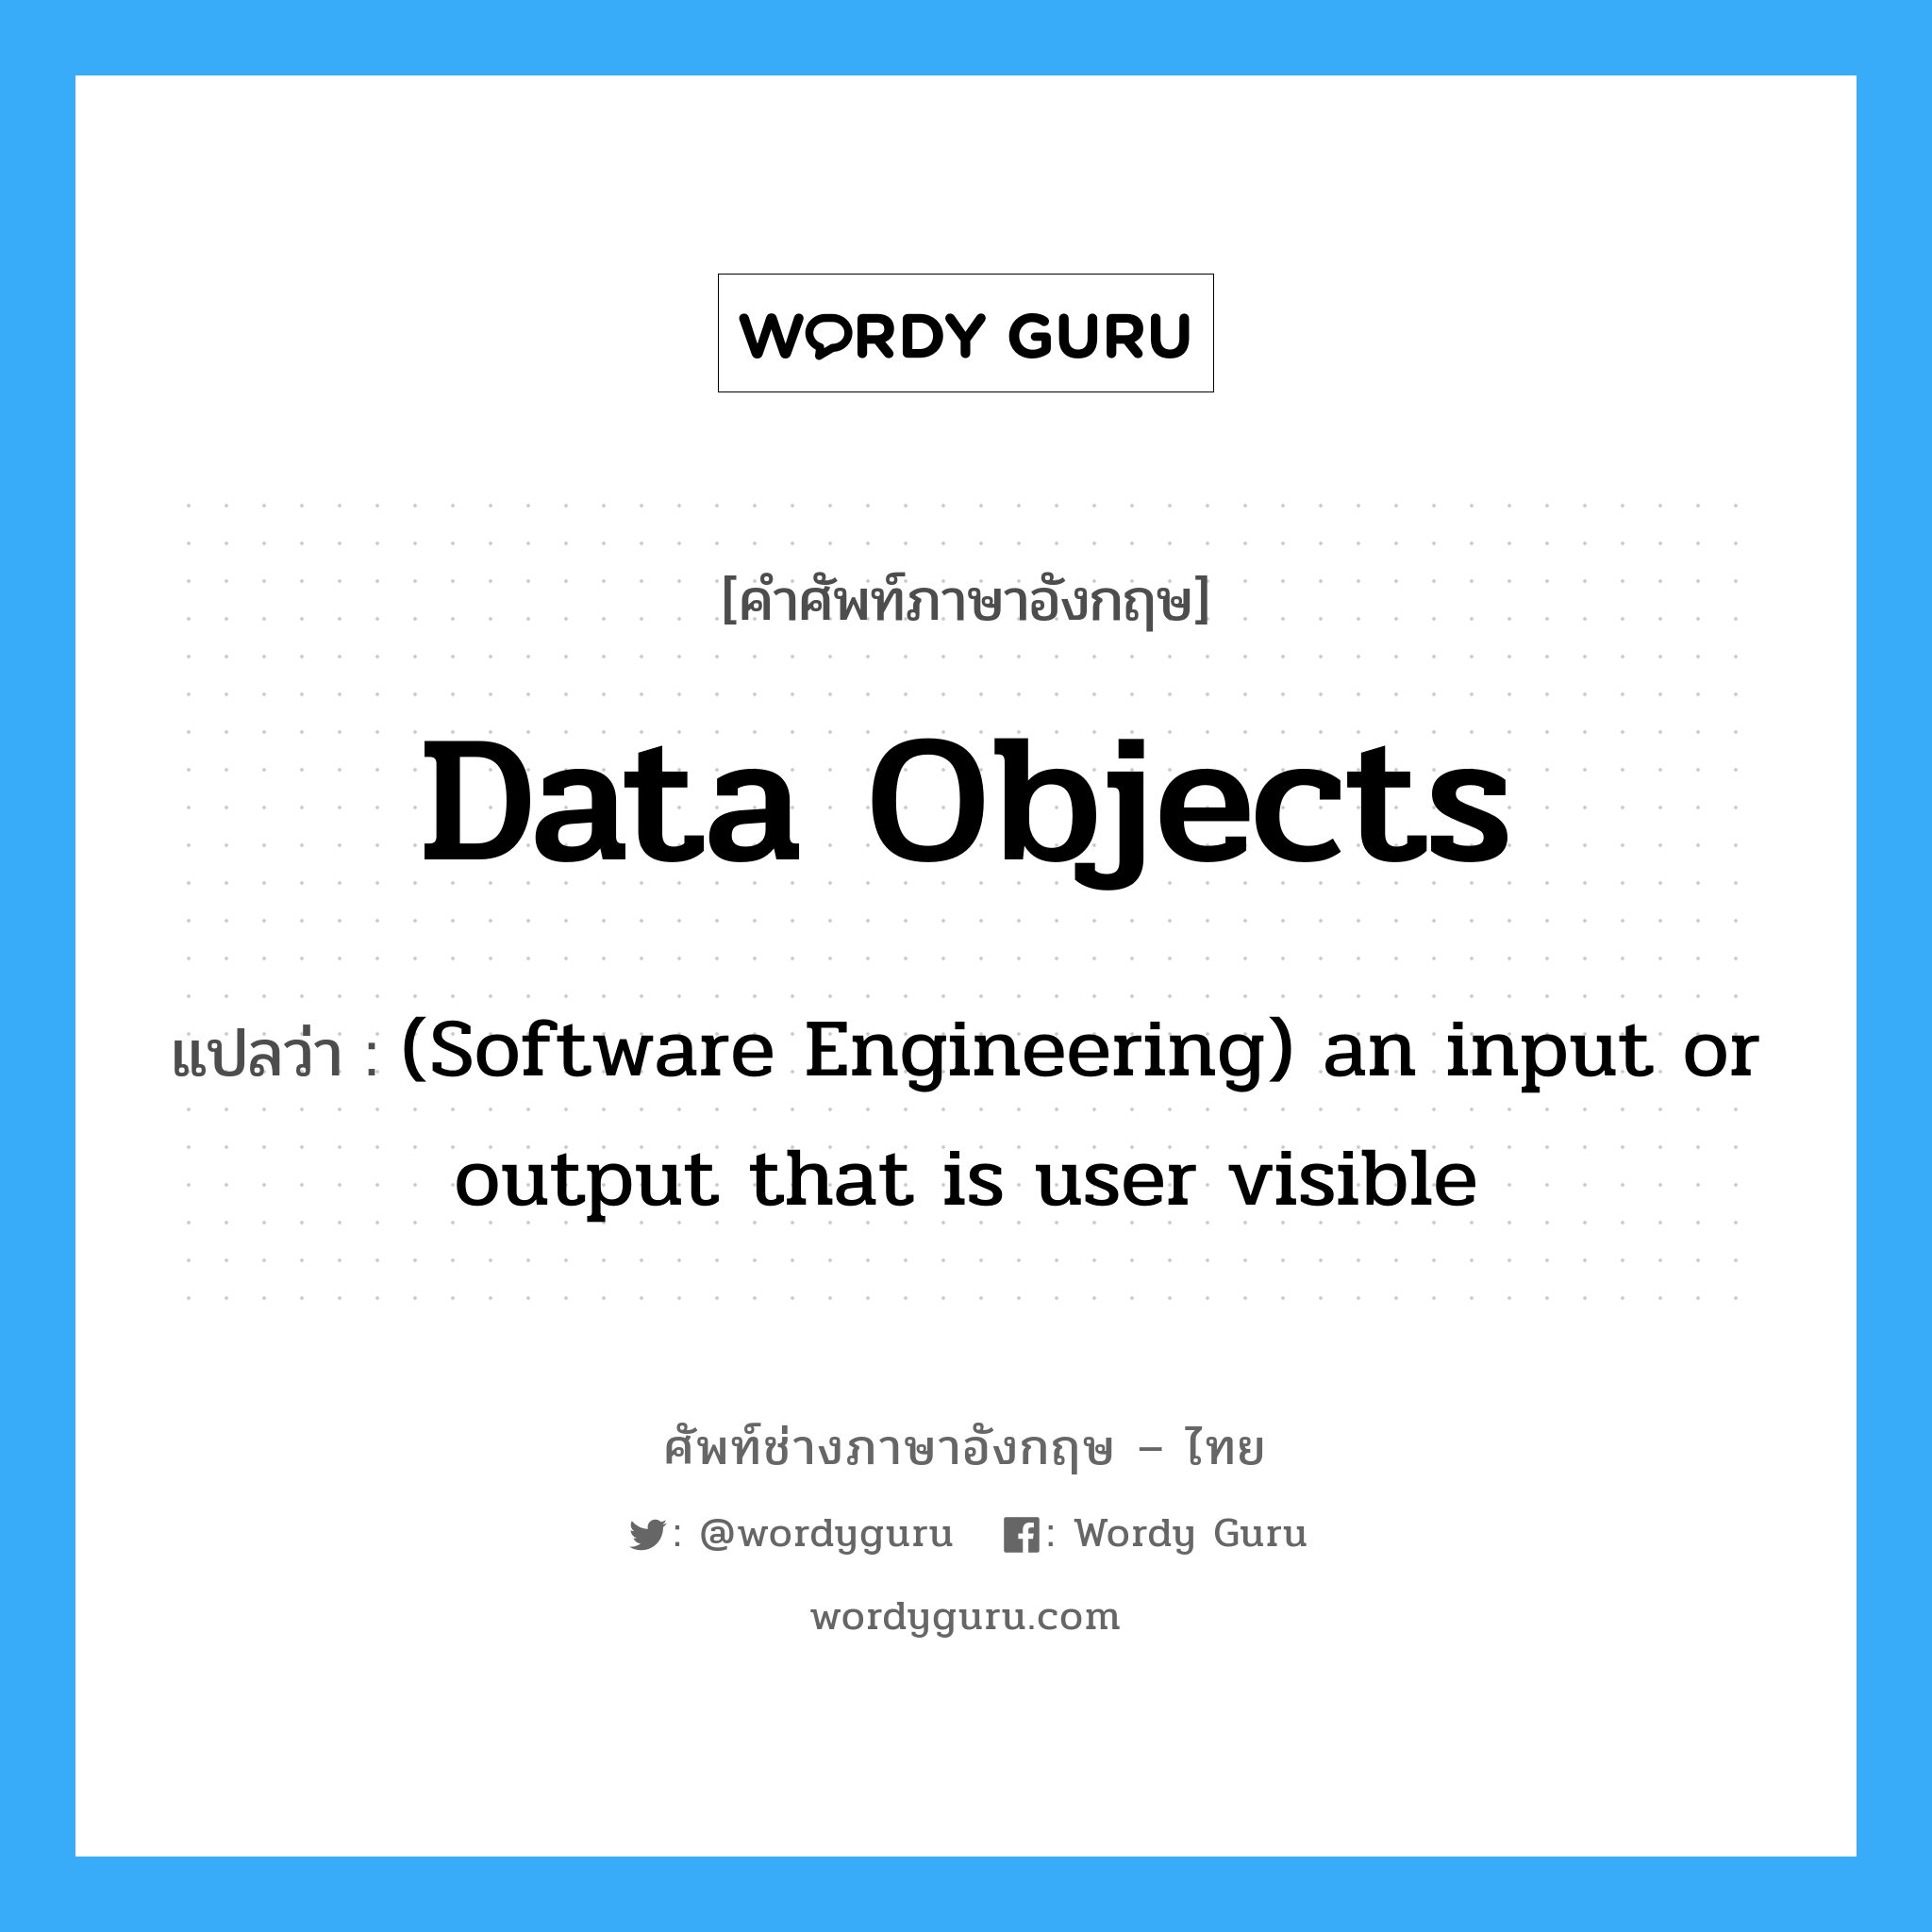 Data objects แปลว่า?, คำศัพท์ช่างภาษาอังกฤษ - ไทย Data objects คำศัพท์ภาษาอังกฤษ Data objects แปลว่า (Software Engineering) an input or output that is user visible